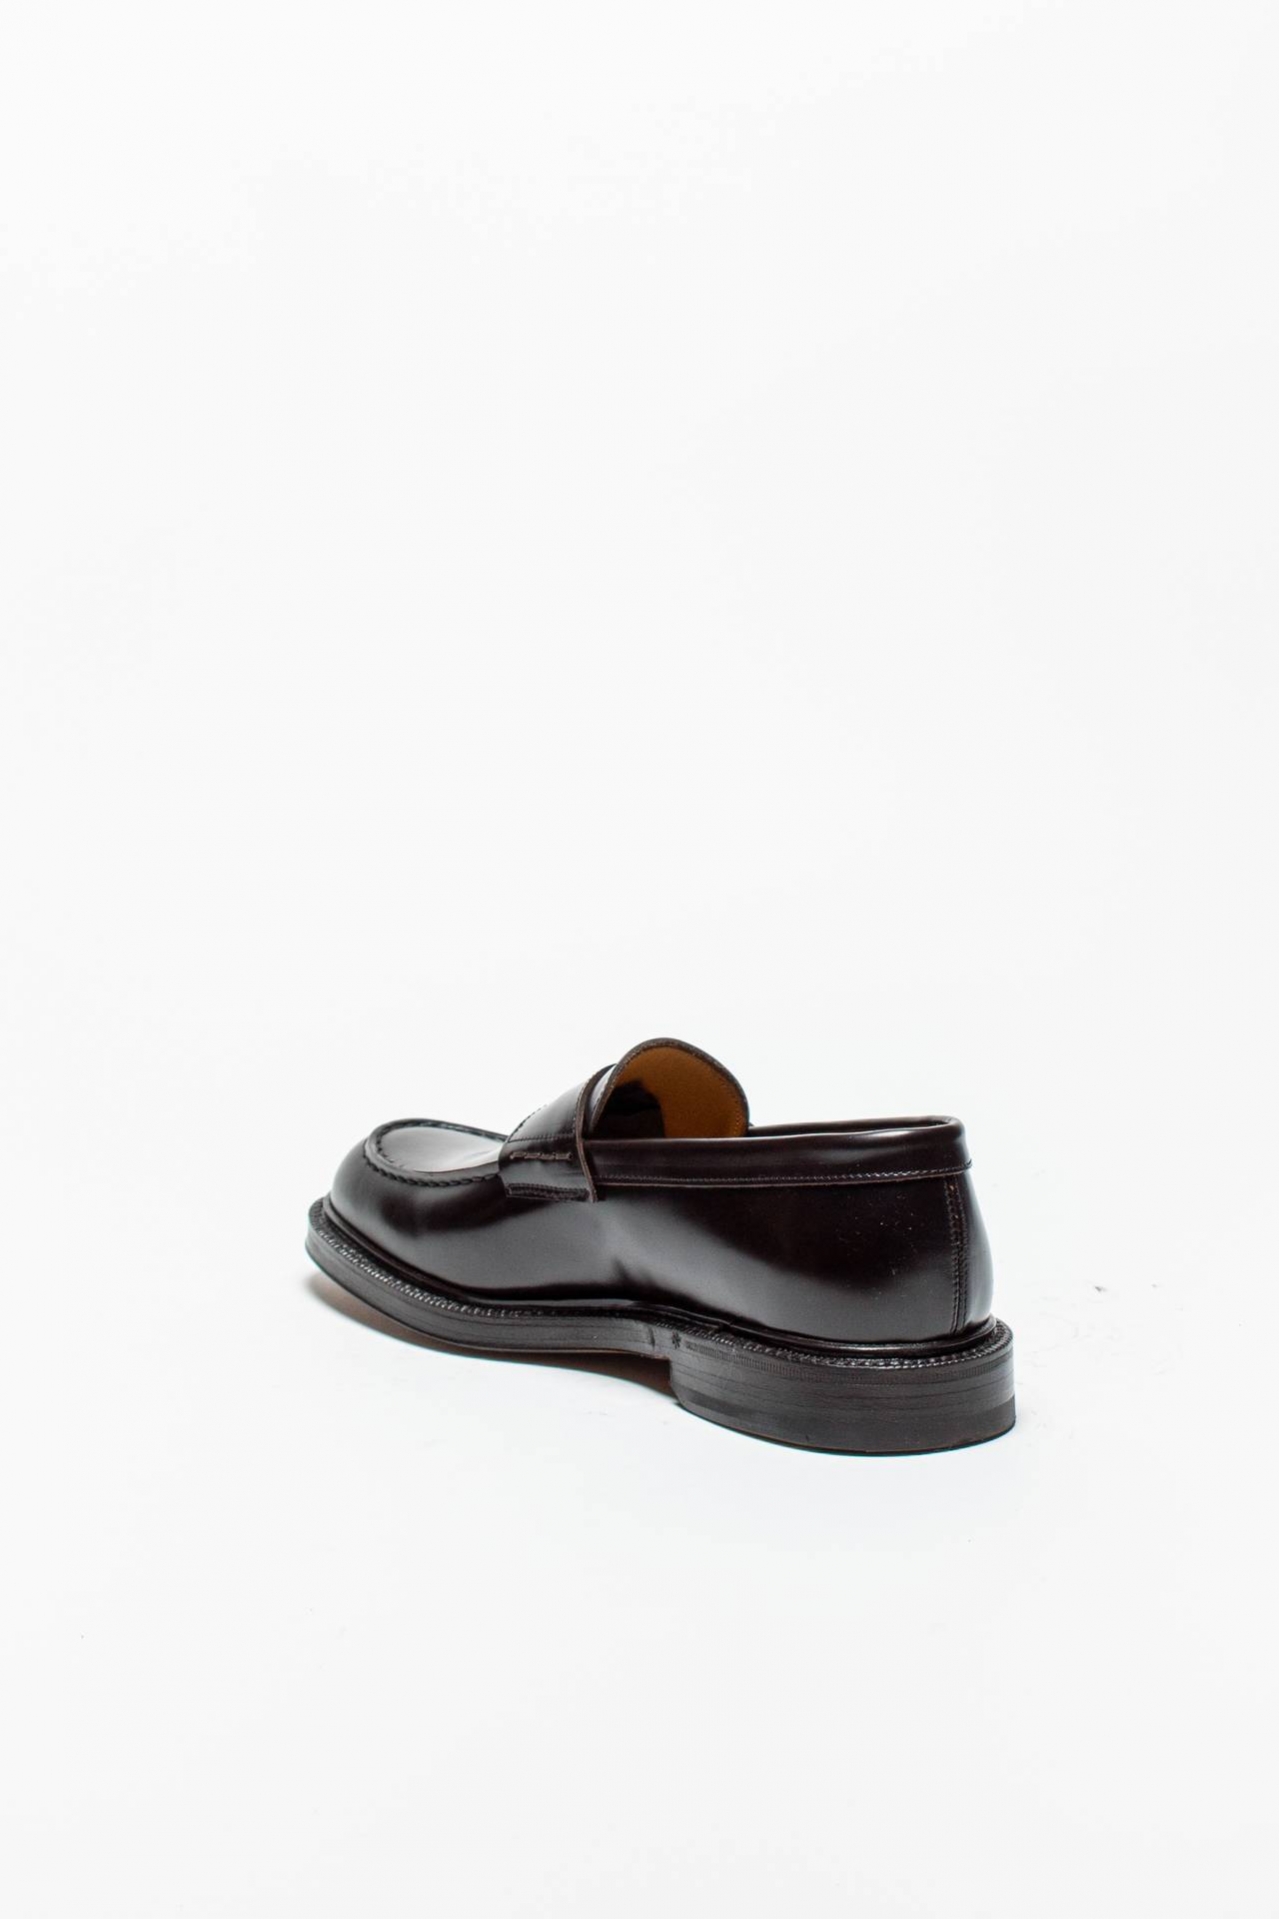 Loafers 1203-97 in leather